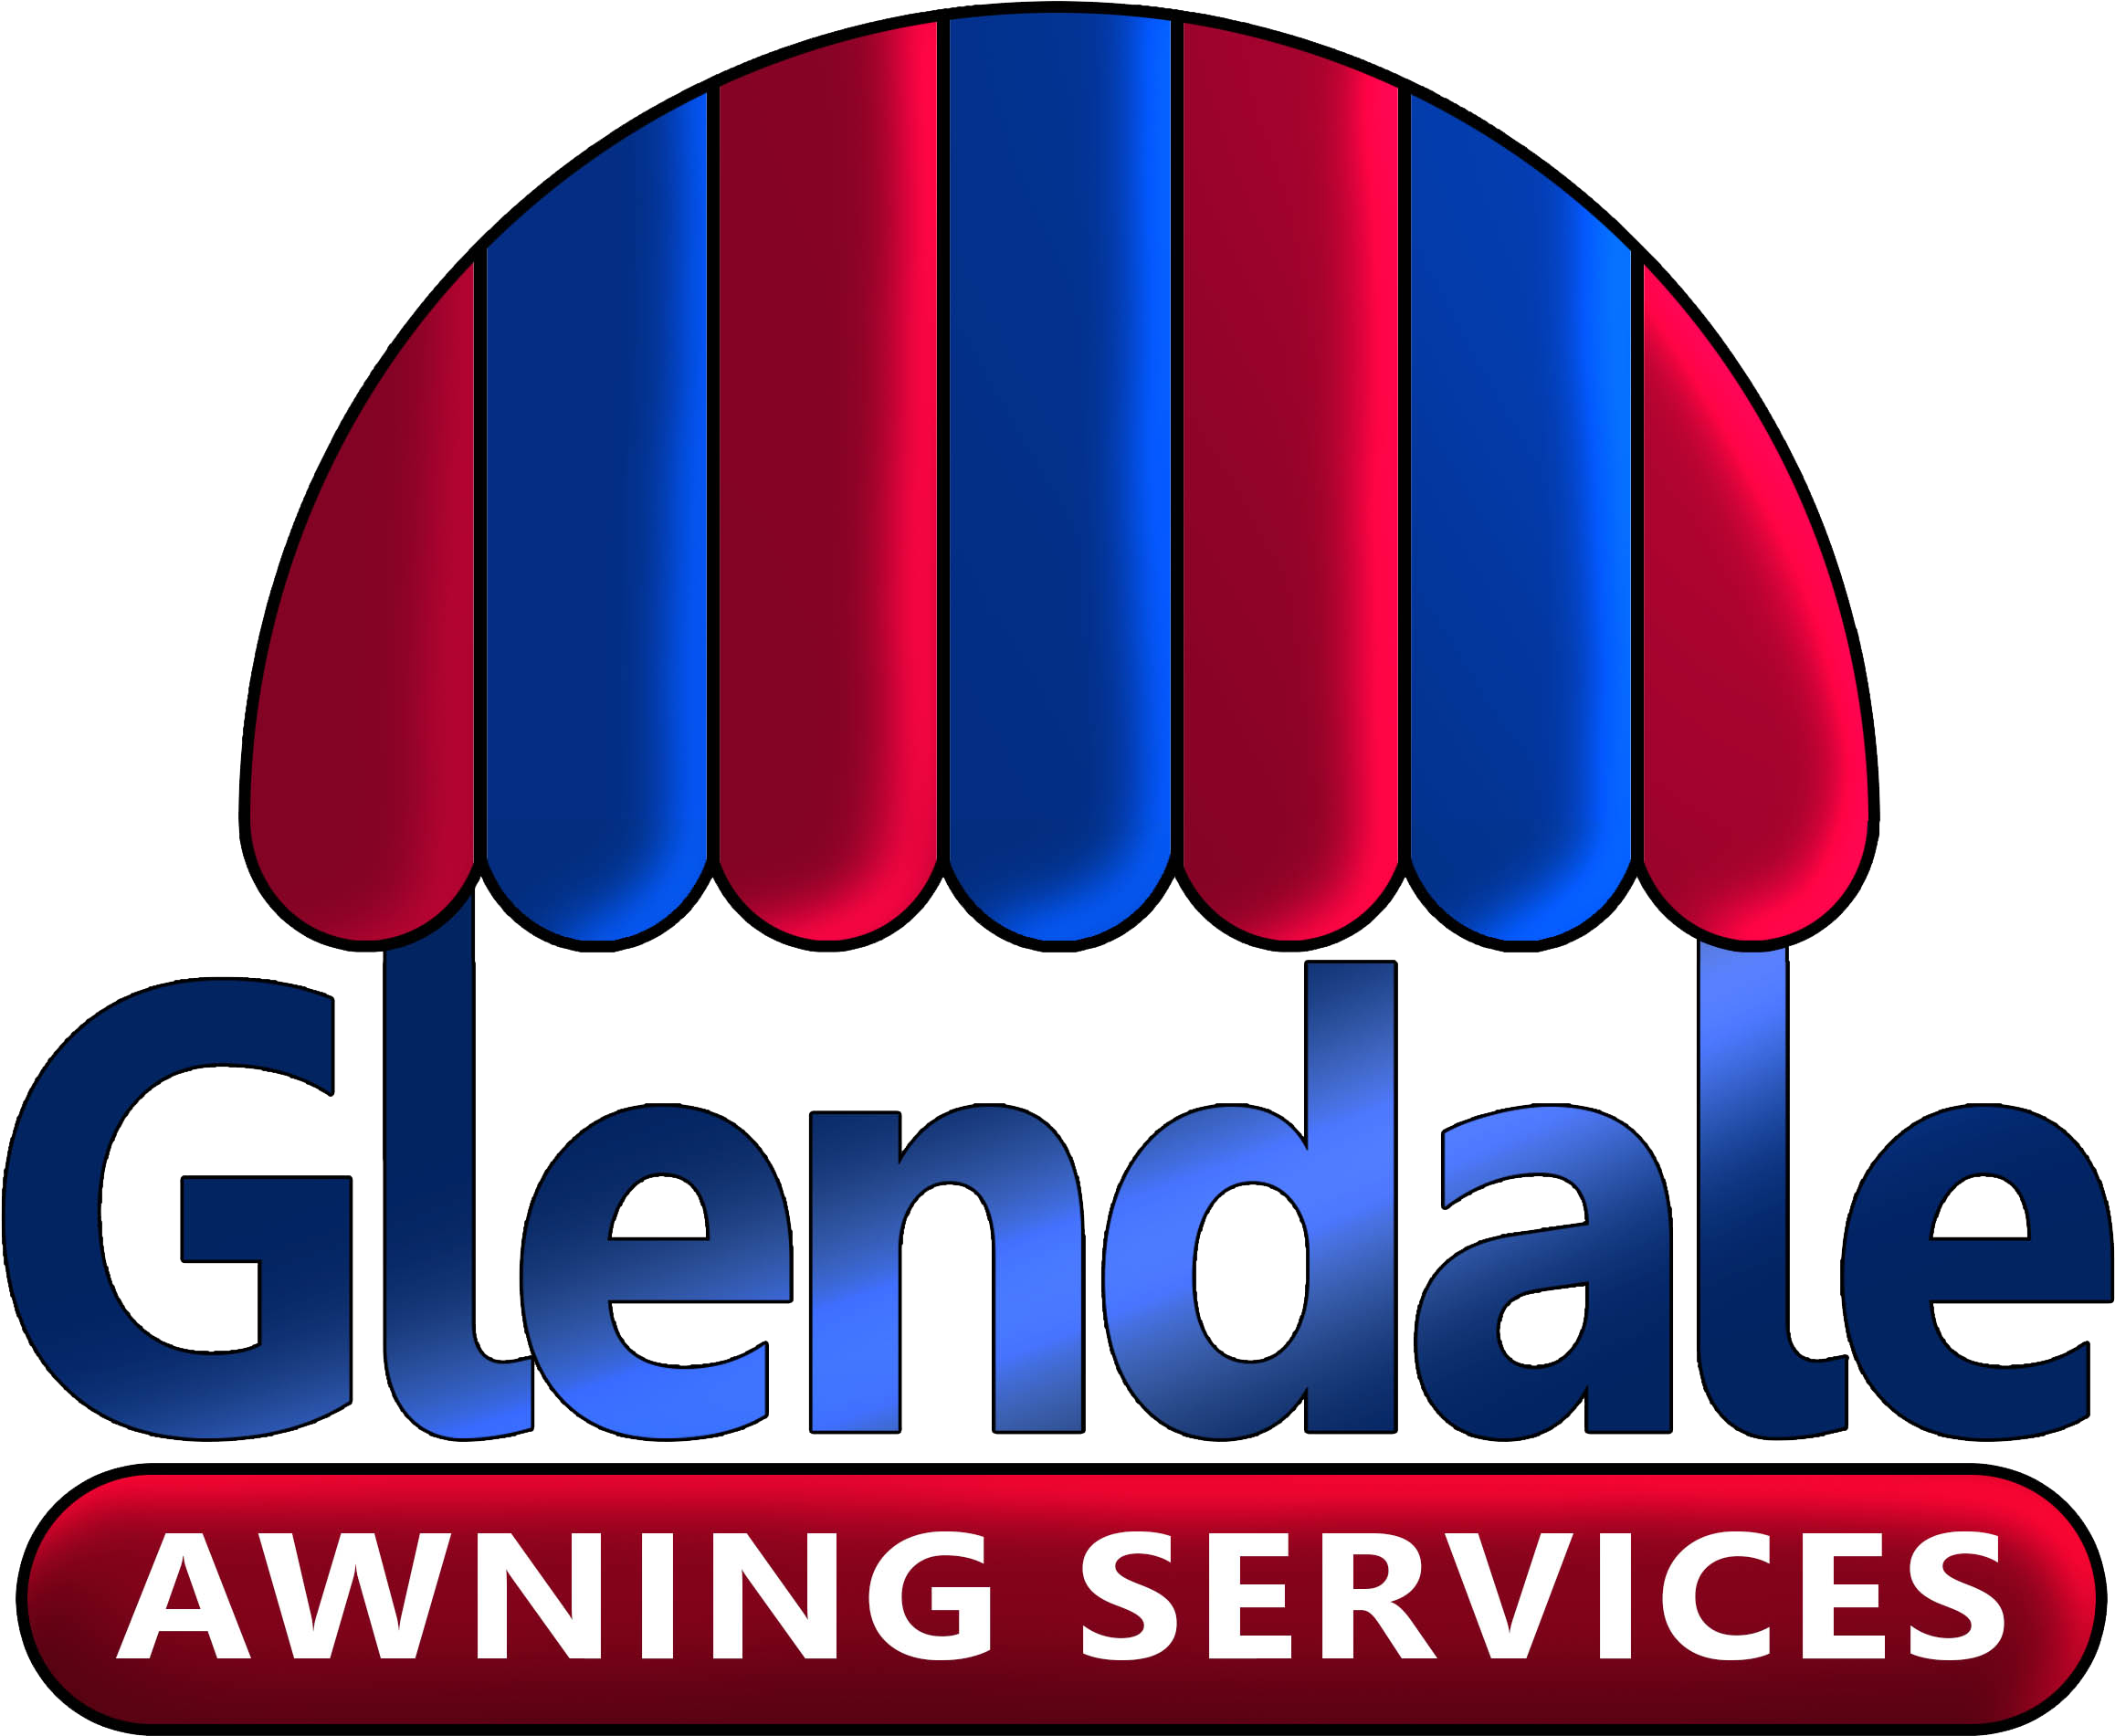 Large - Glendale Awning Services (3300x2550)